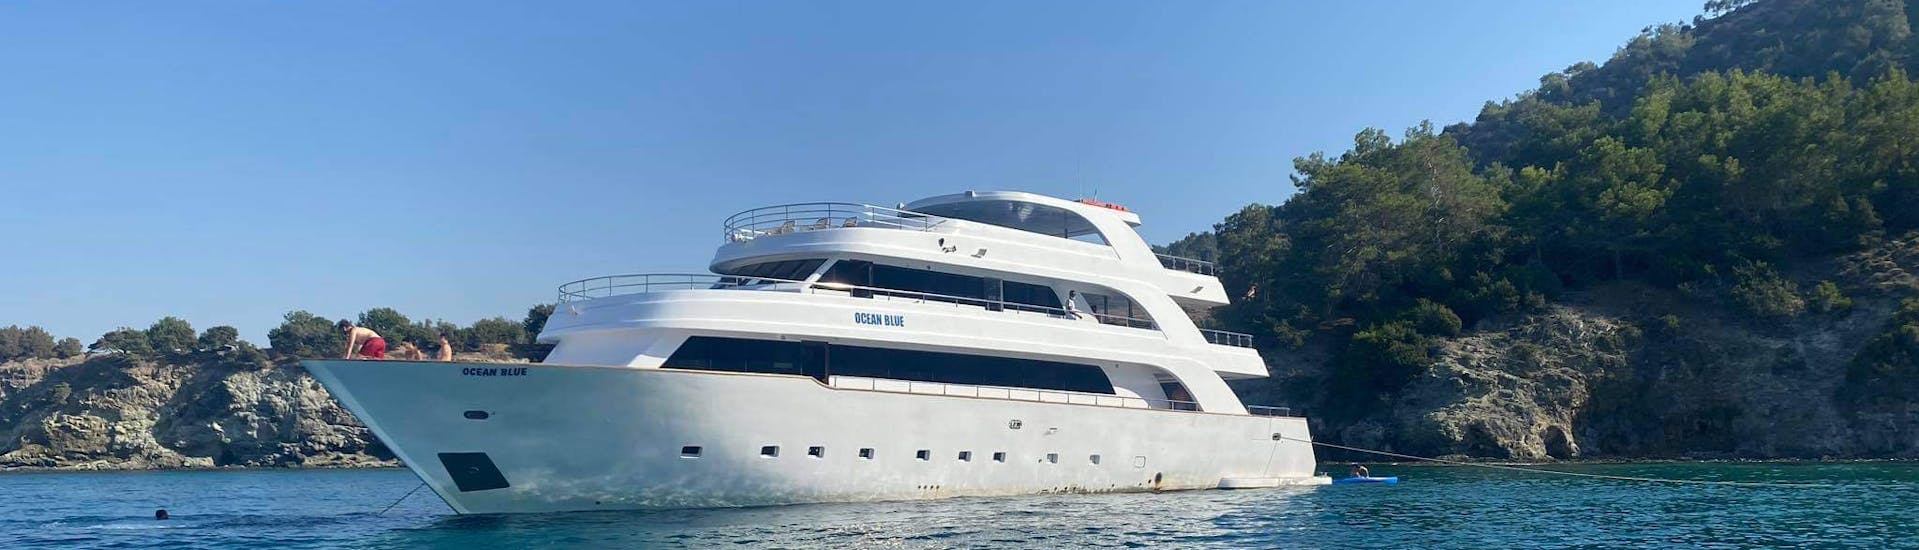 Picture of the boat used for the Luxury Yacht Trip to the Baths of Aphrodite and the Blue Lagoon with Paphos Sea Cruises Cyprus.